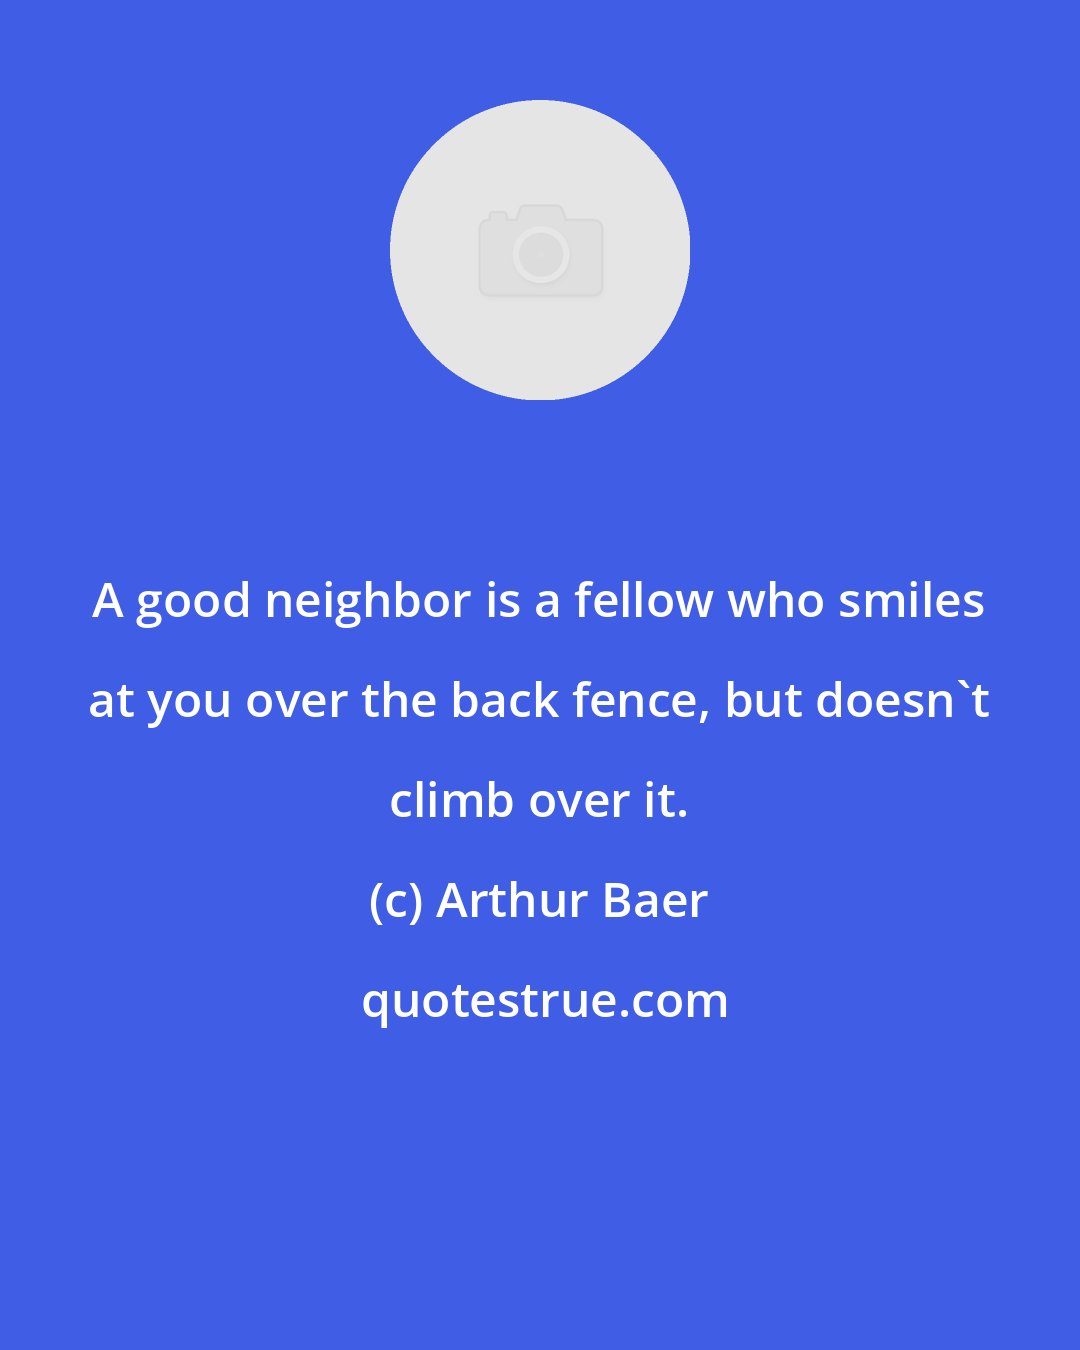 Arthur Baer: A good neighbor is a fellow who smiles at you over the back fence, but doesn't climb over it.